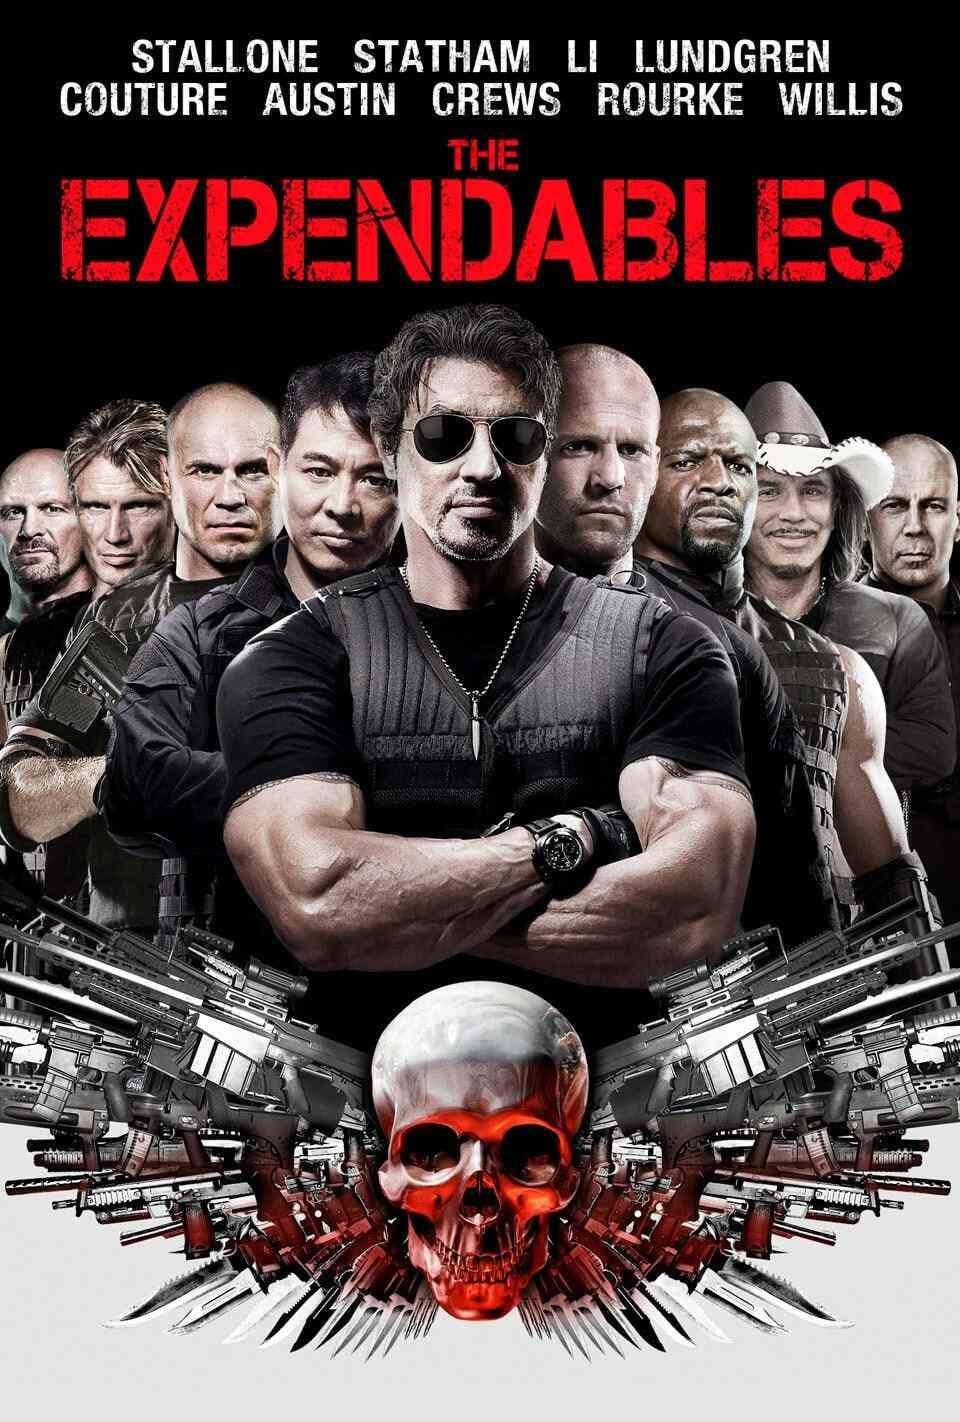 Read The Expendables screenplay (poster)